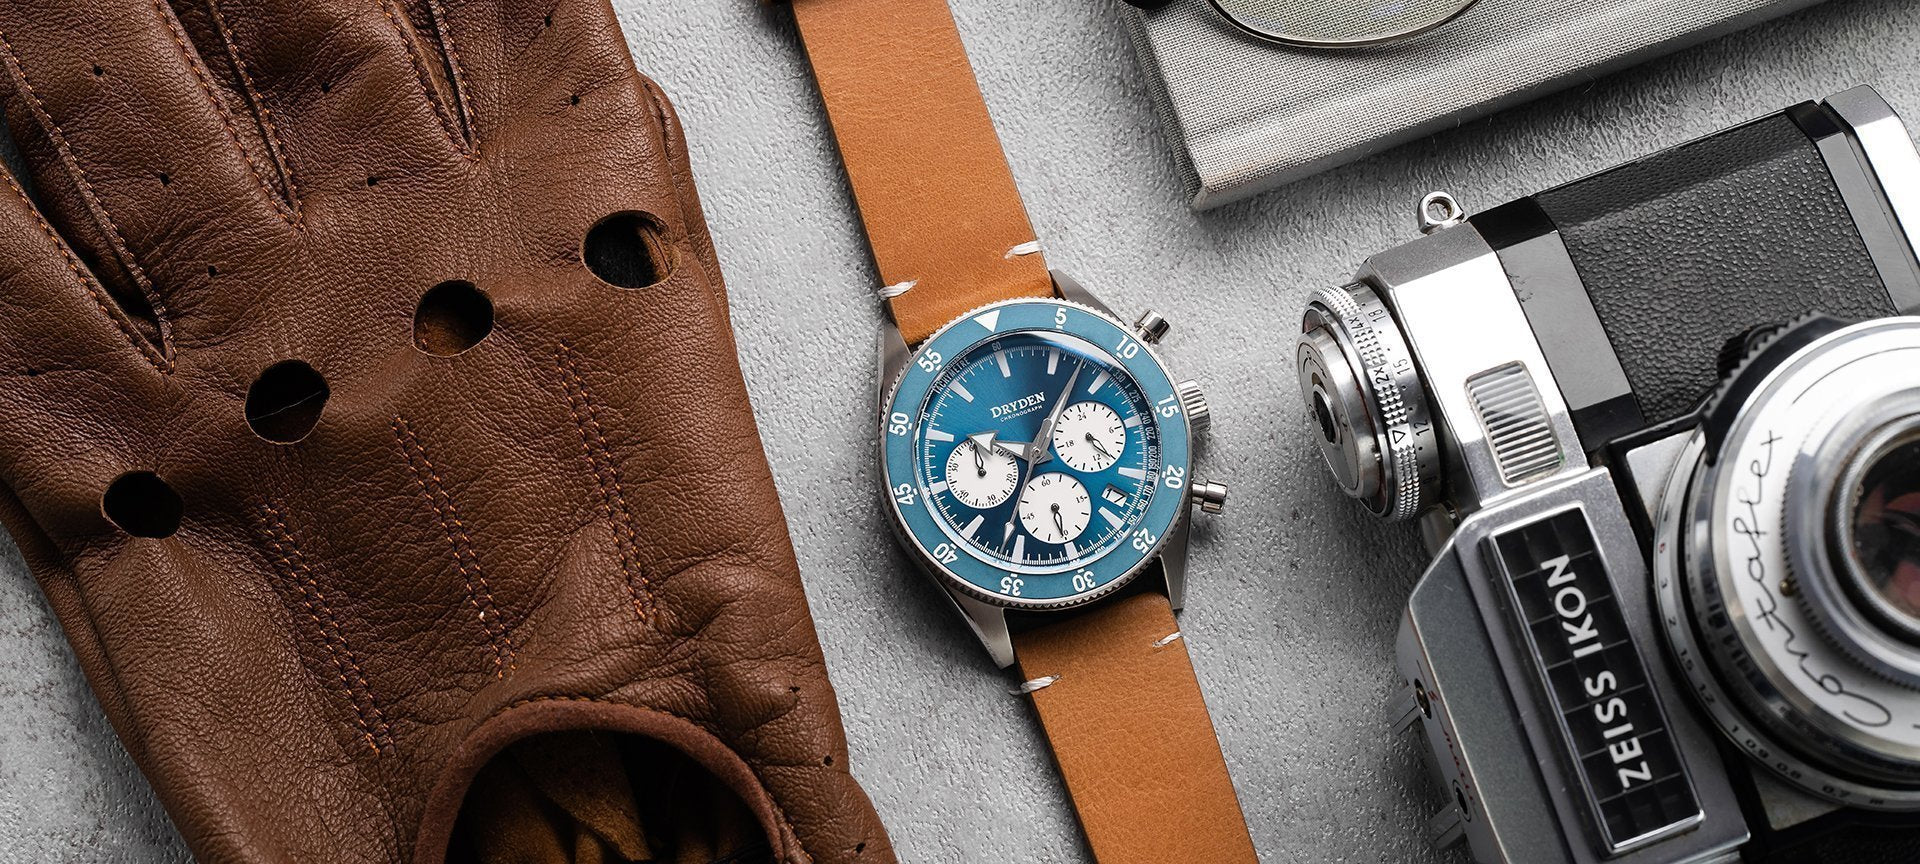 Dryden Watch Company - Chrono Diver Series 1 Launch